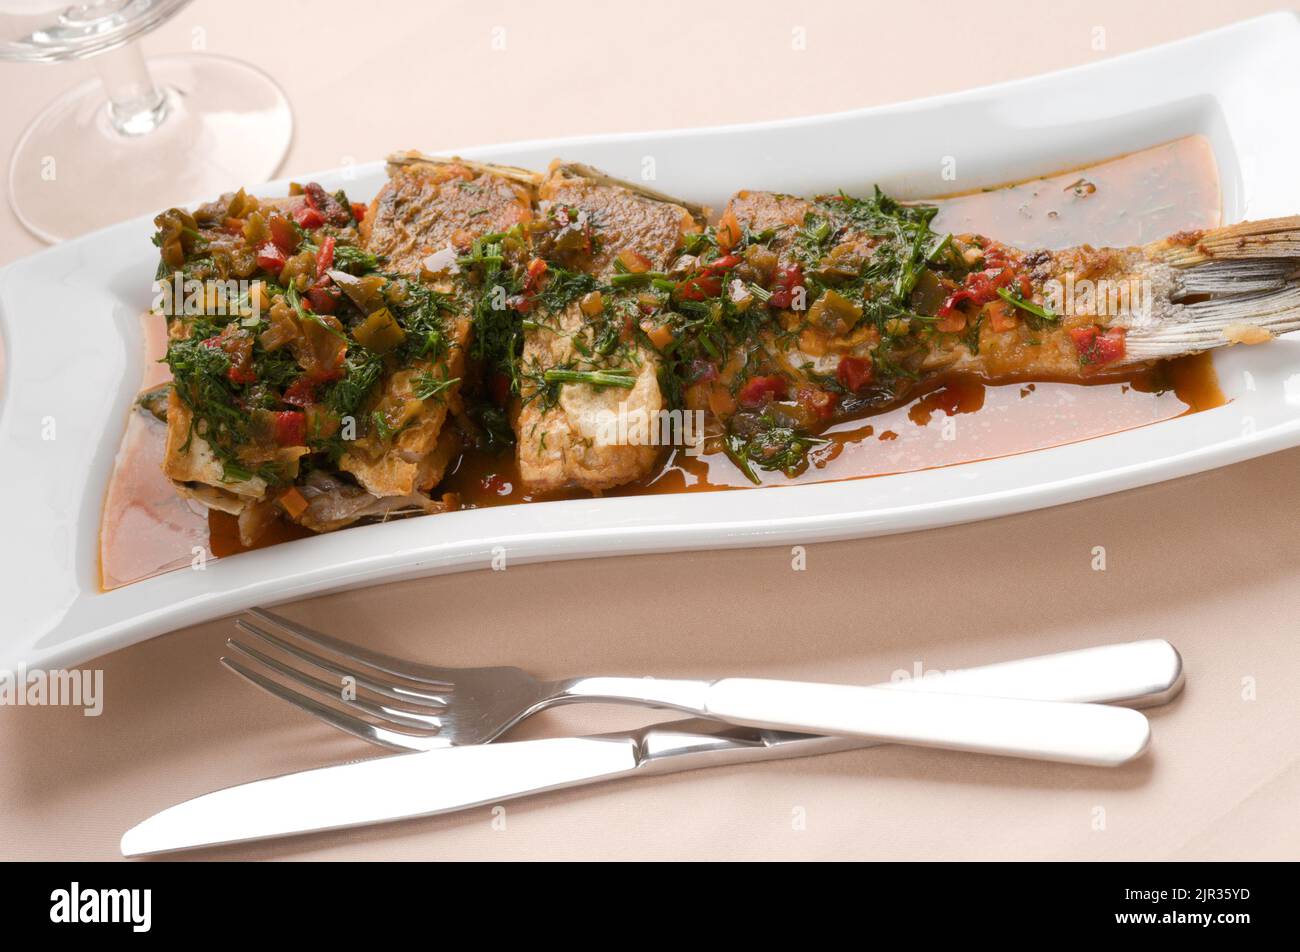 Roasted fish under tomato sauce and vegetables served on a long styled plate Stock Photo